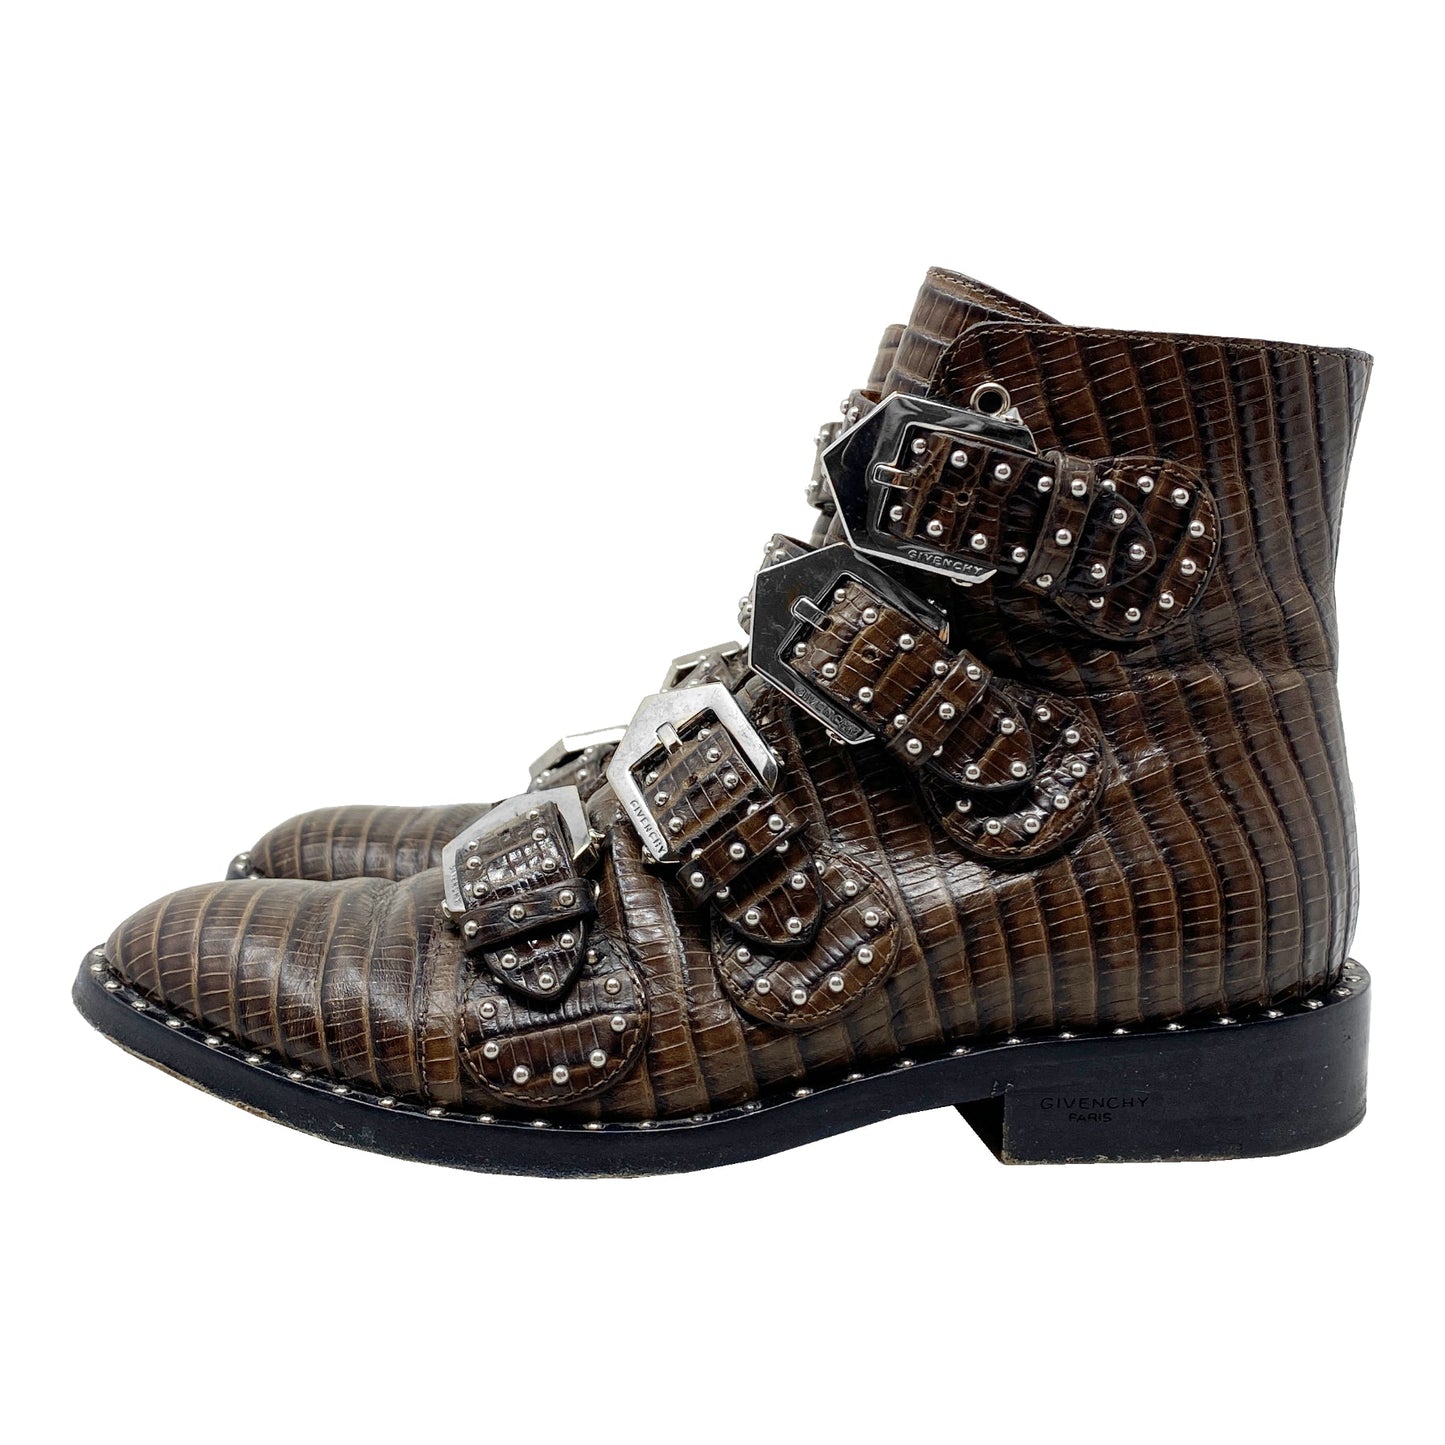 Givenchy Prue Studded Buckle Embossed Leather Ankle Boots